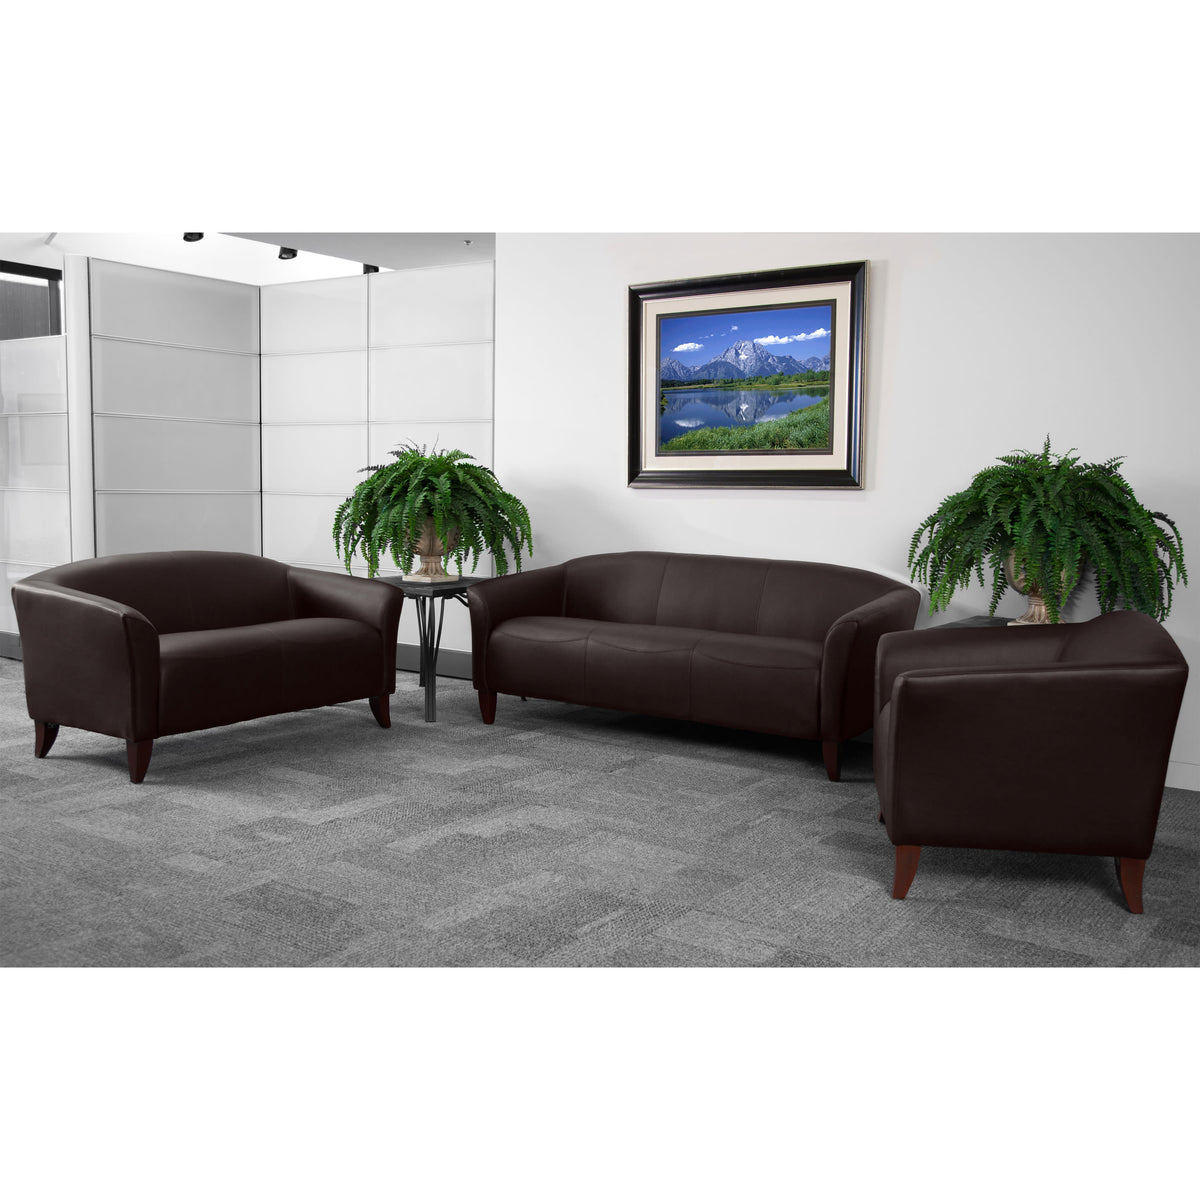 Brown |#| Reception Set in Brown with Cherry Wood Feet - Hospitality and Lounge Furniture